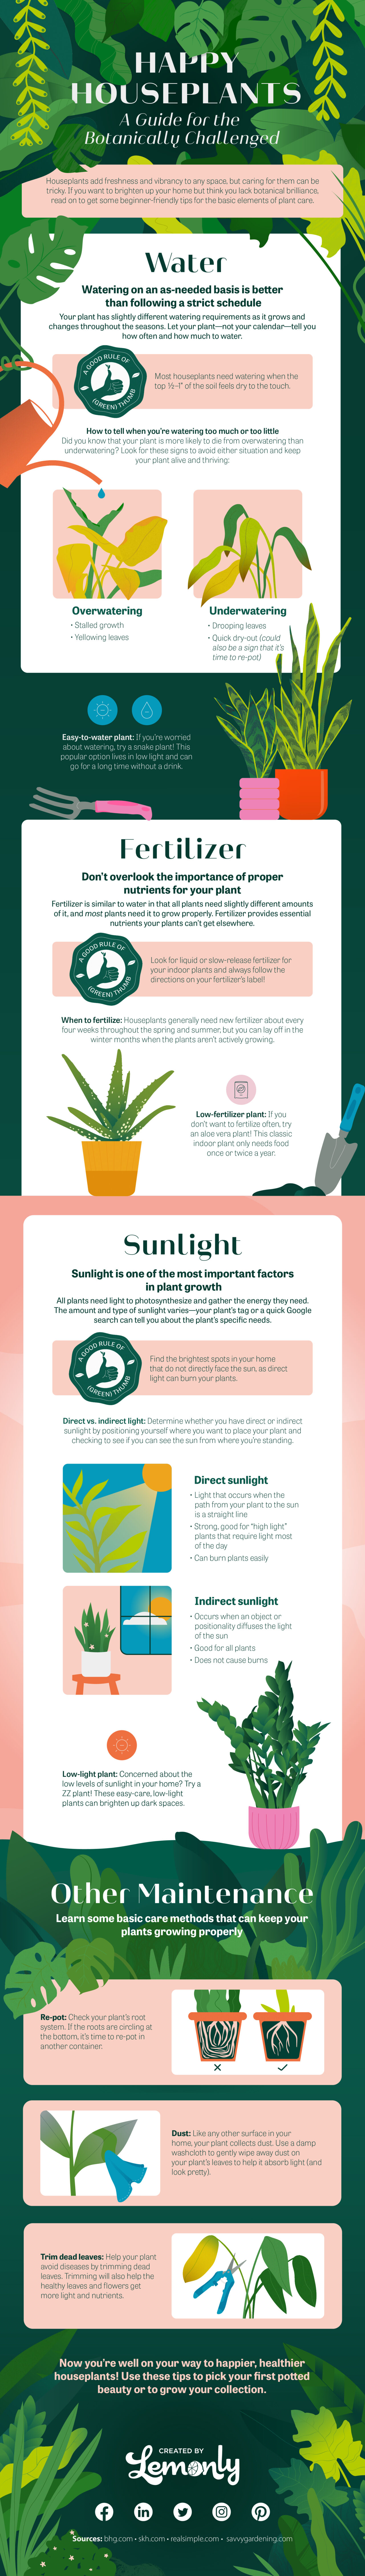 Illustrated infographic featuring tips about growing healthy houseplants